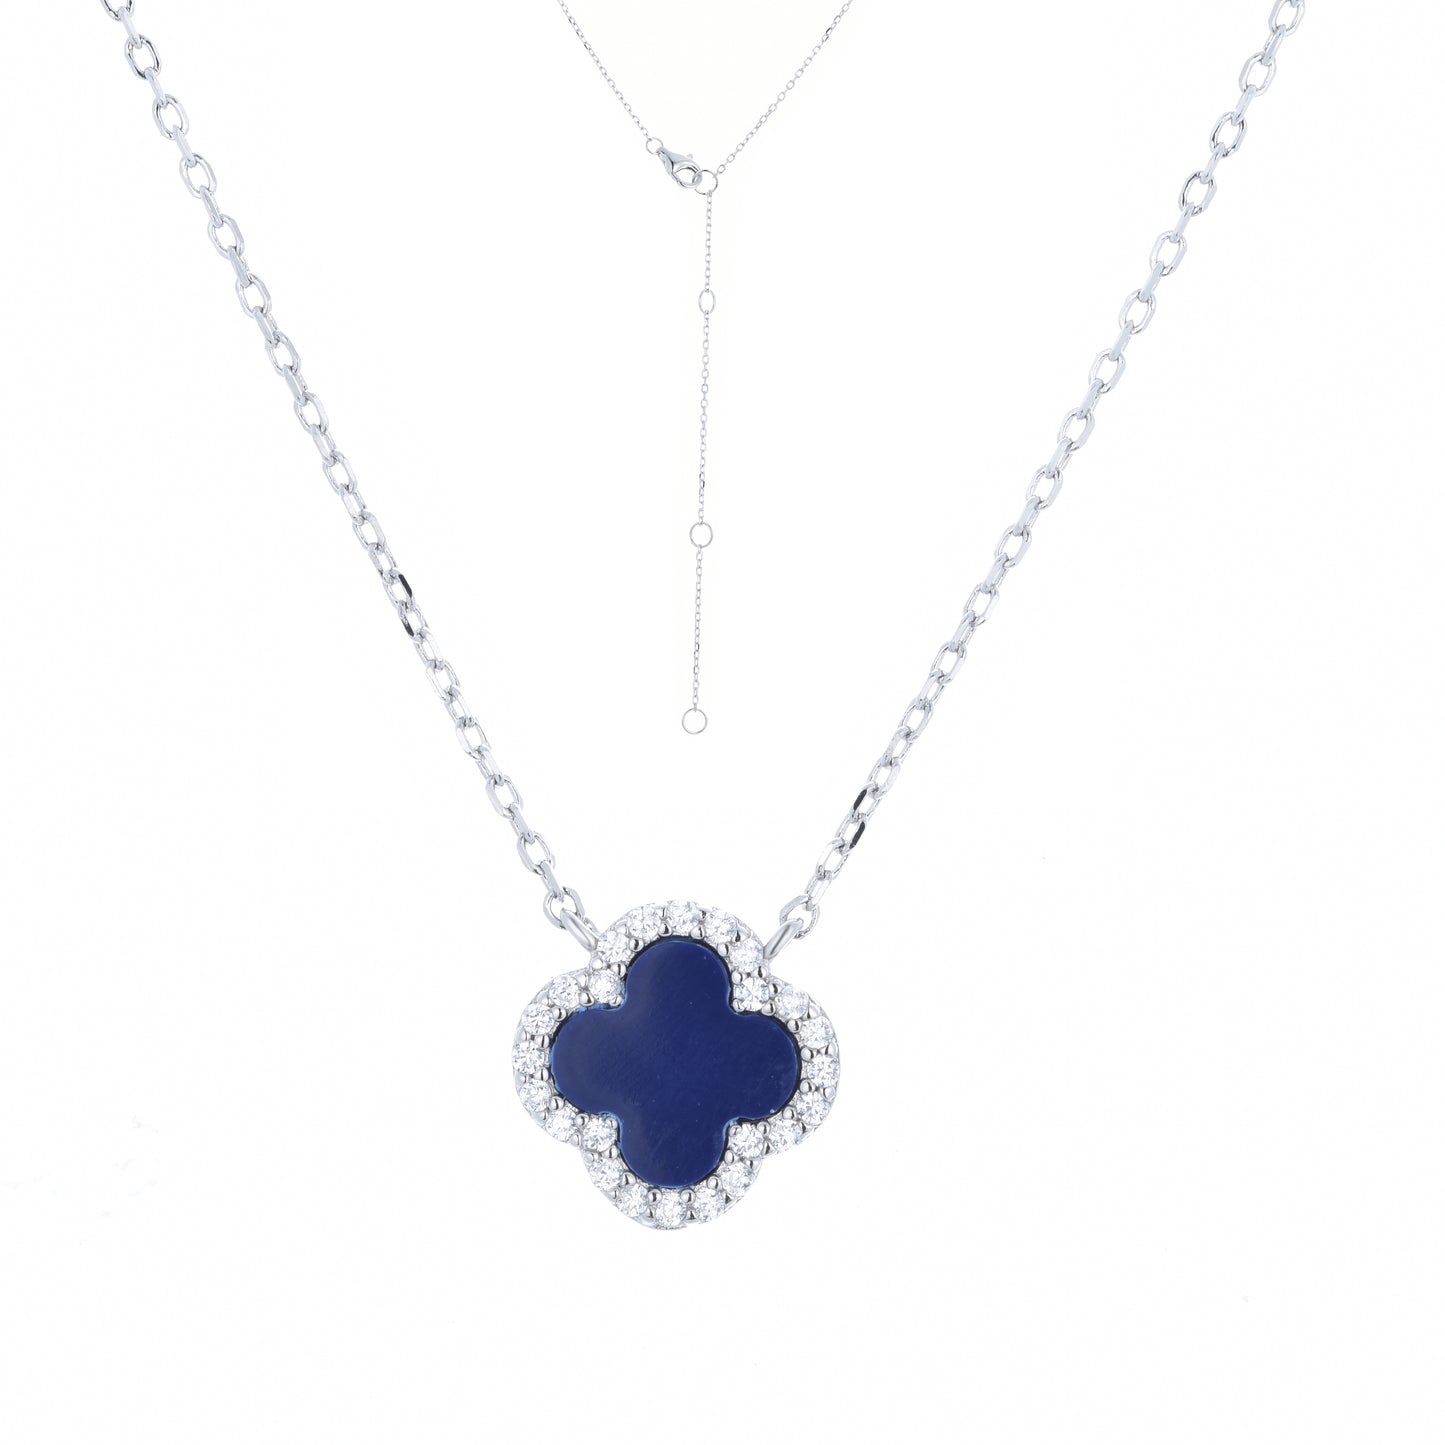 NG-5/S/LAP - Chain Necklace with Lapis Clover Charm